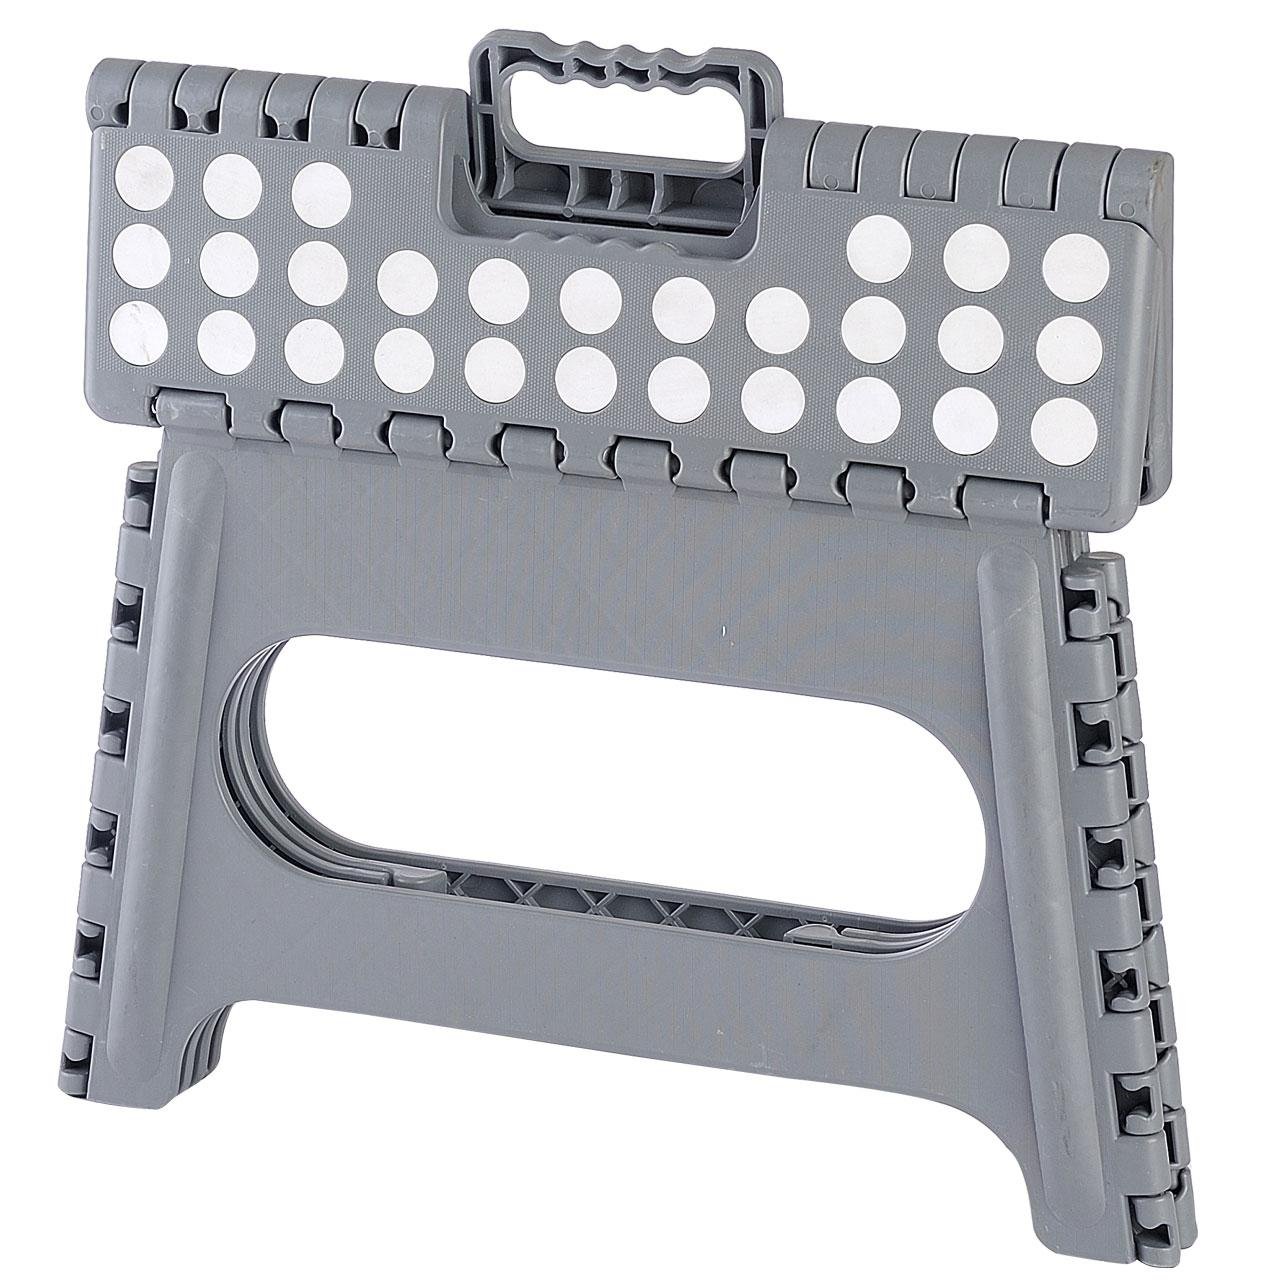 Non-Slip Foldable Step Stool with Carrying Handle 3